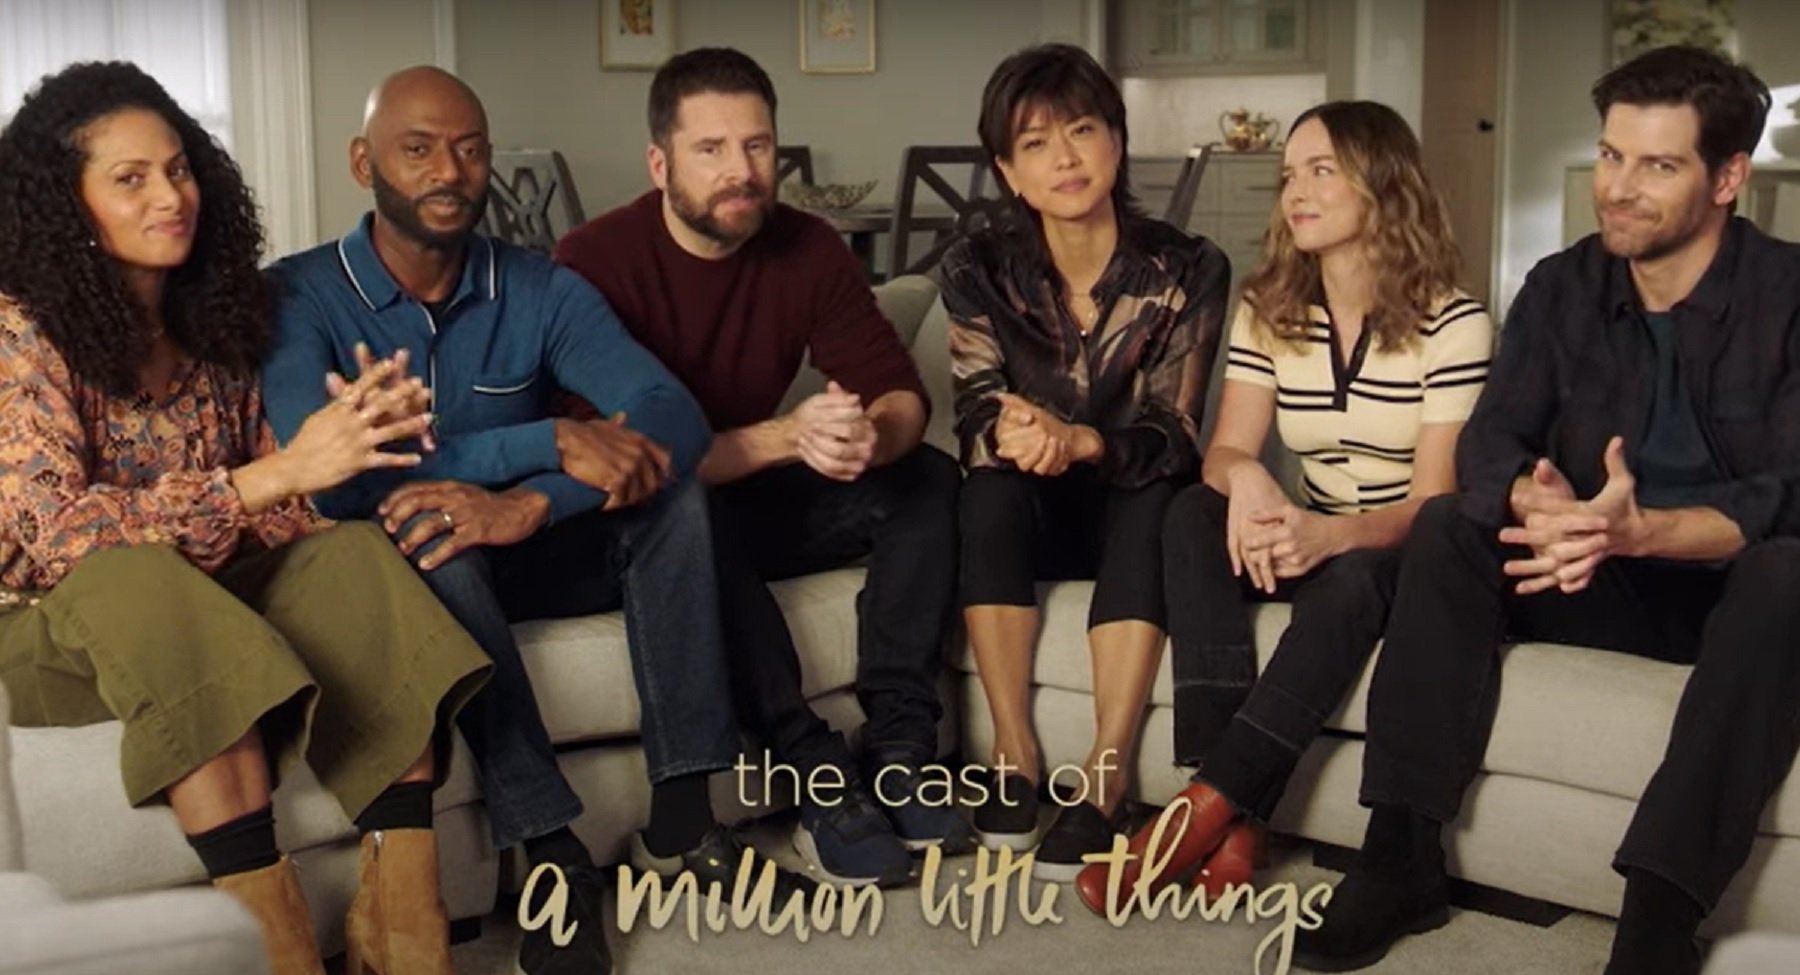 'A Million Little Things' Season 5 cast members David Giuntoli, Romany Malco, Allison Miller, James Roday Rodriguez, Christina Moses, and Grace Park sitting together on a couch